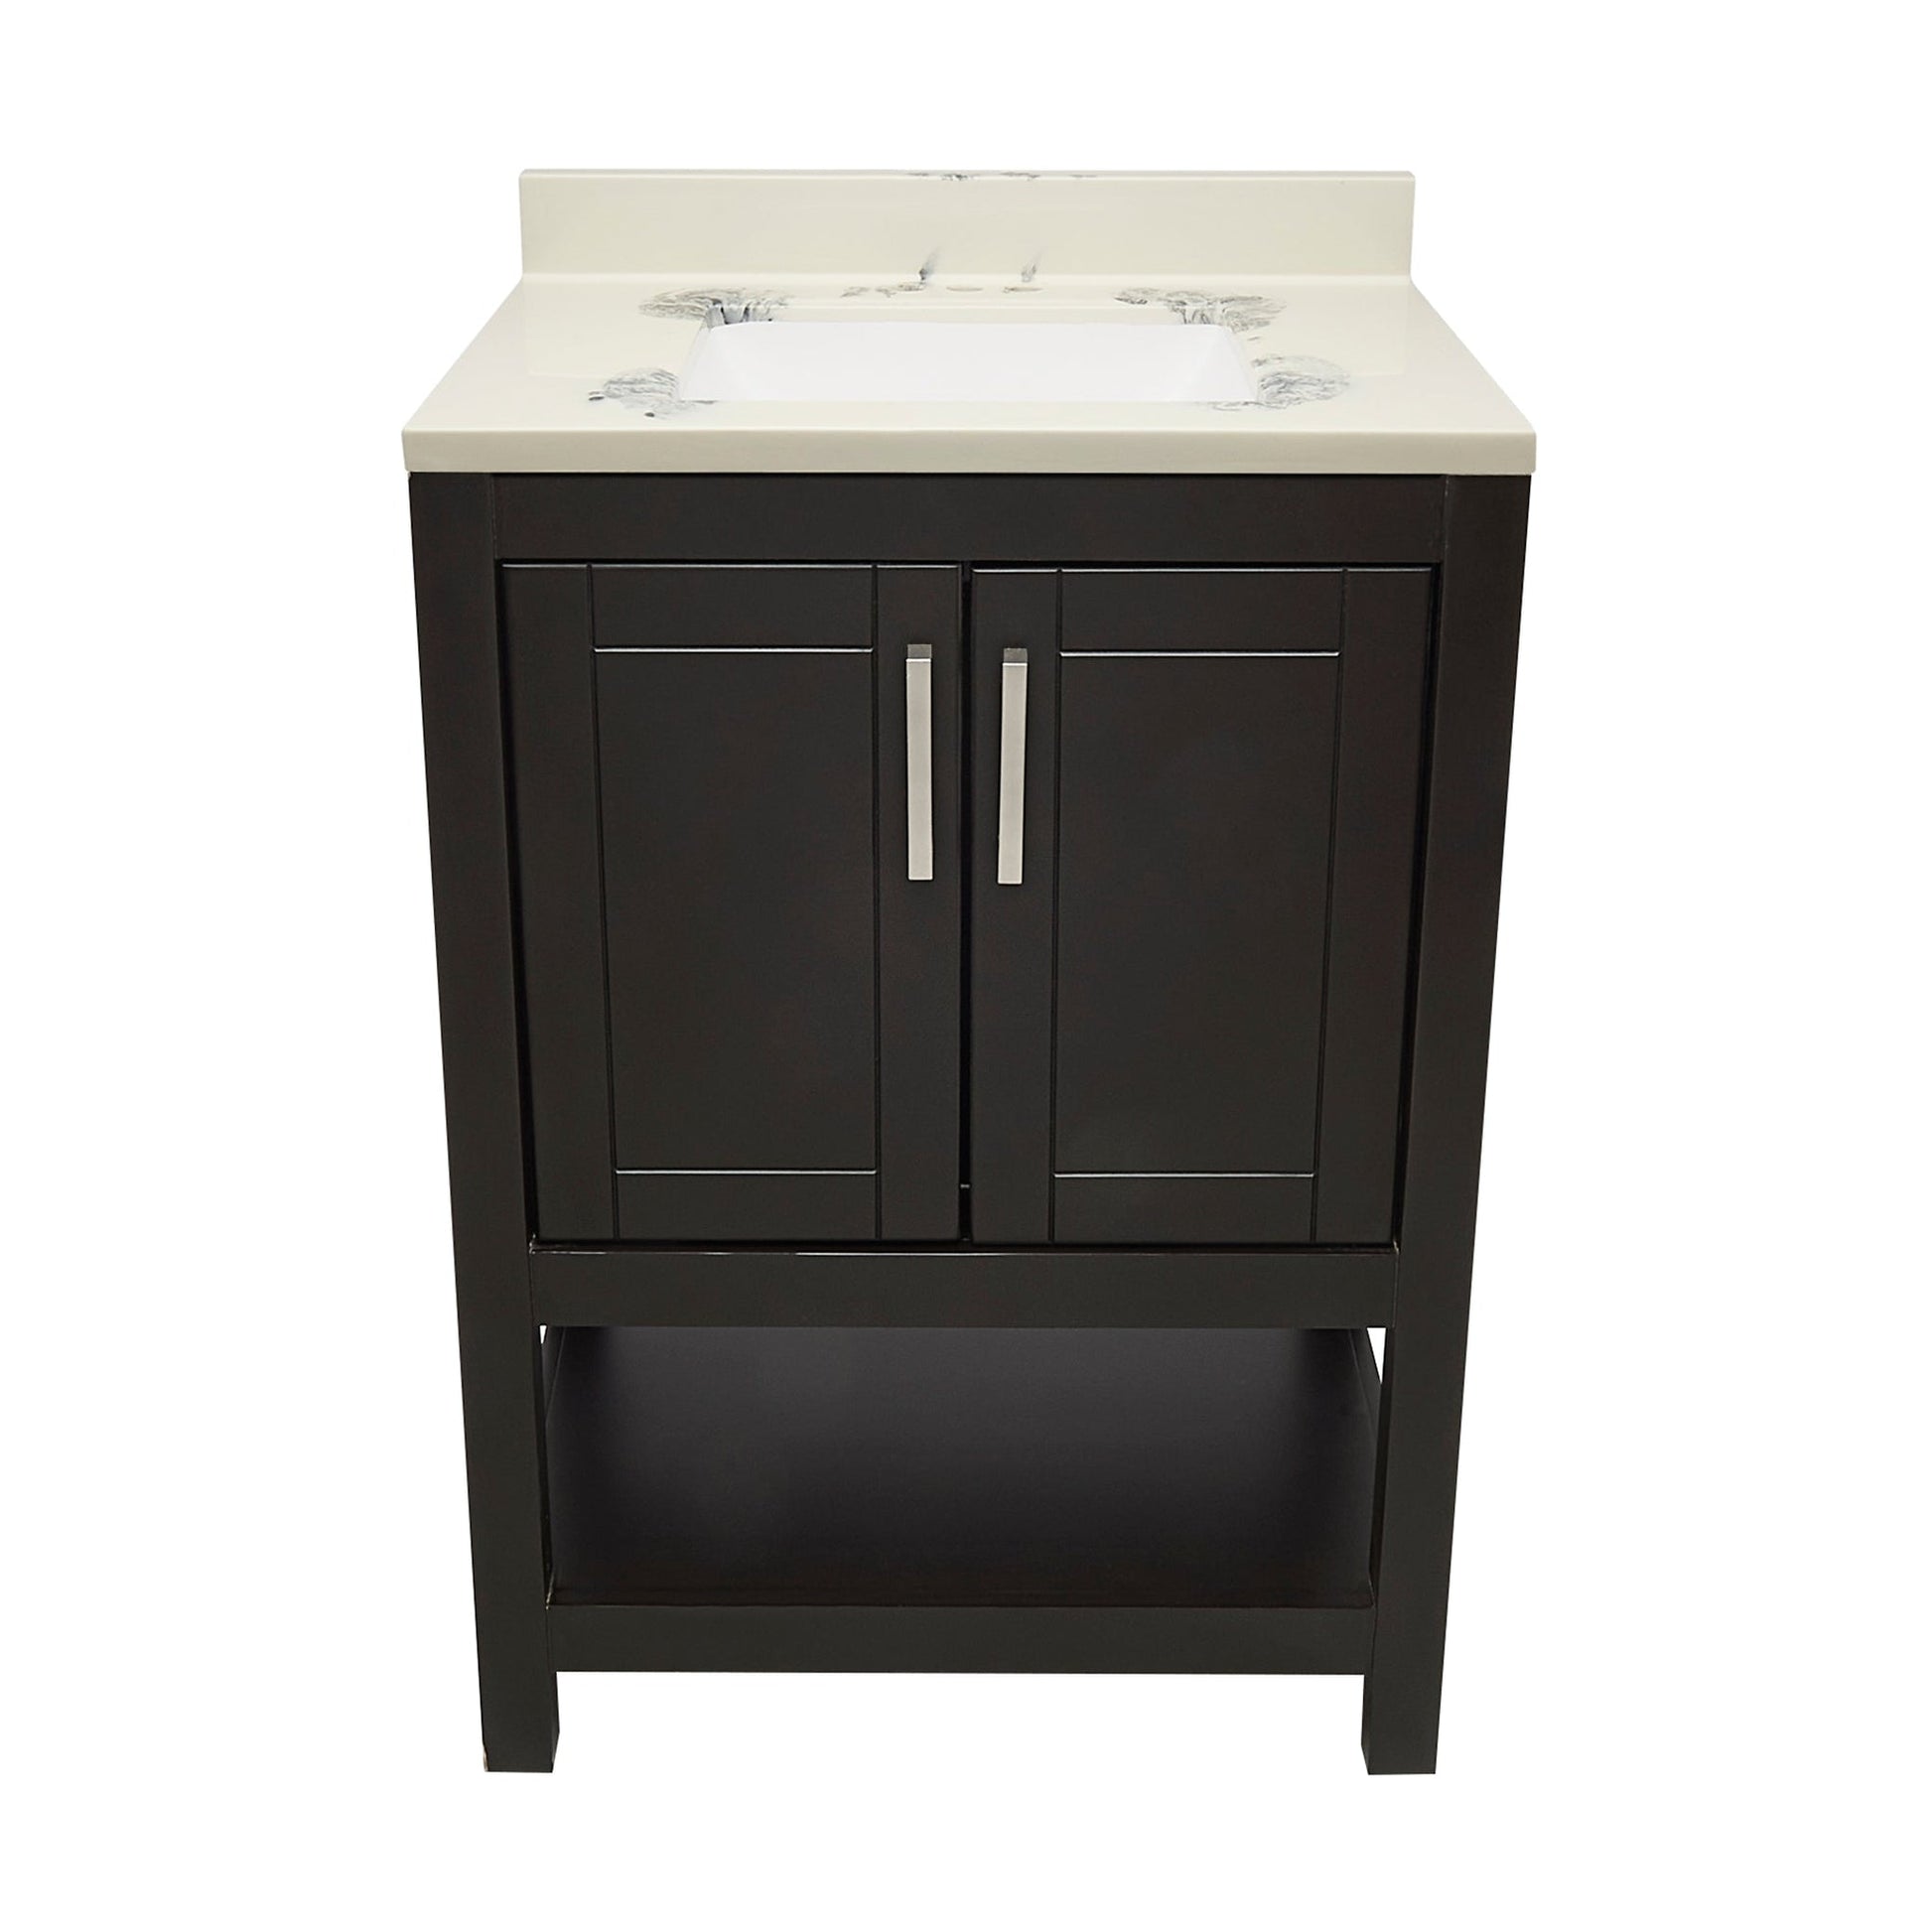 Ella's Bubbles Taos 25" Espresso Bathroom Vanity With Carrara White Cultured Marble Top With Backsplash and Sink